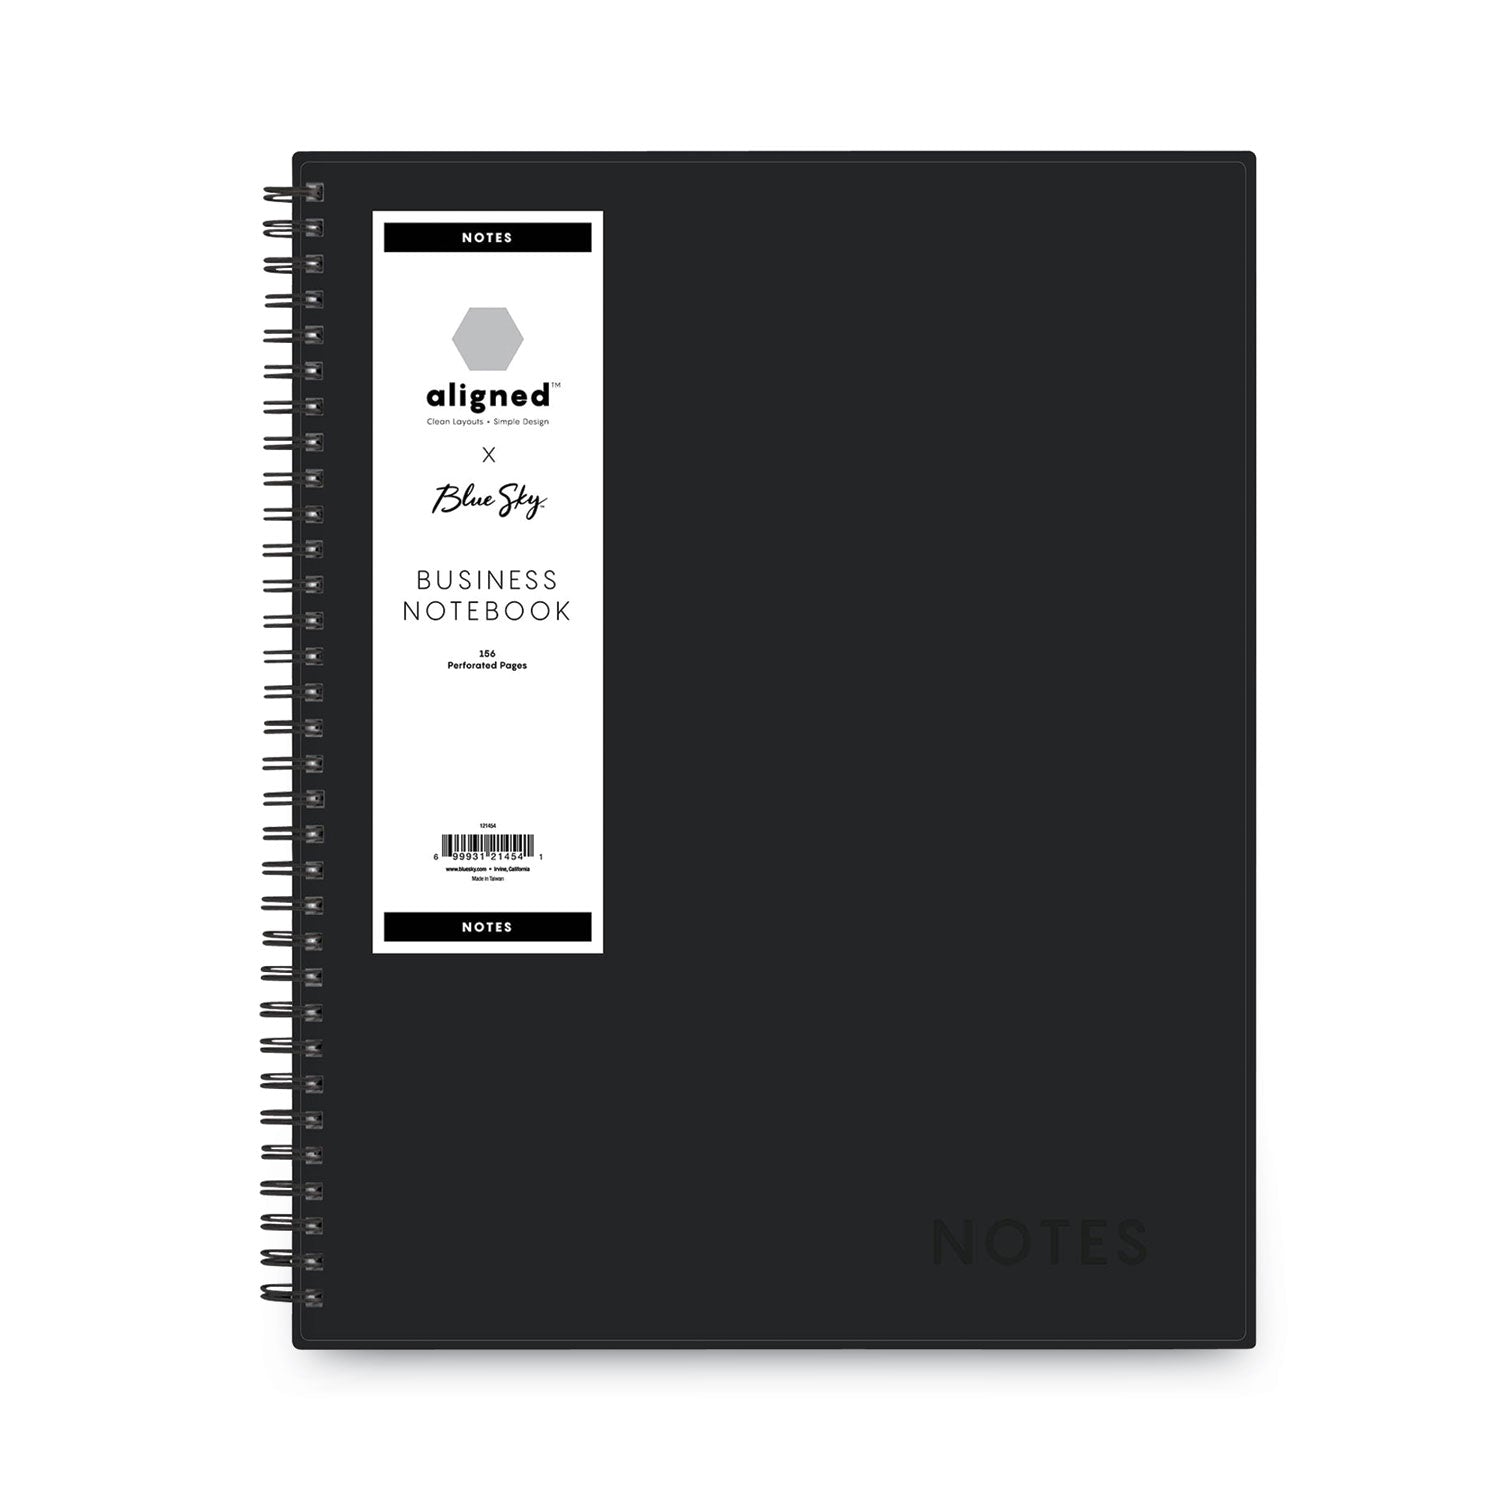 aligned-business-notebook-1-subject-meeting-minutes-notes-format-with-narrow-rule-black-cover-78-11-x-85-sheets_bls121454 - 2